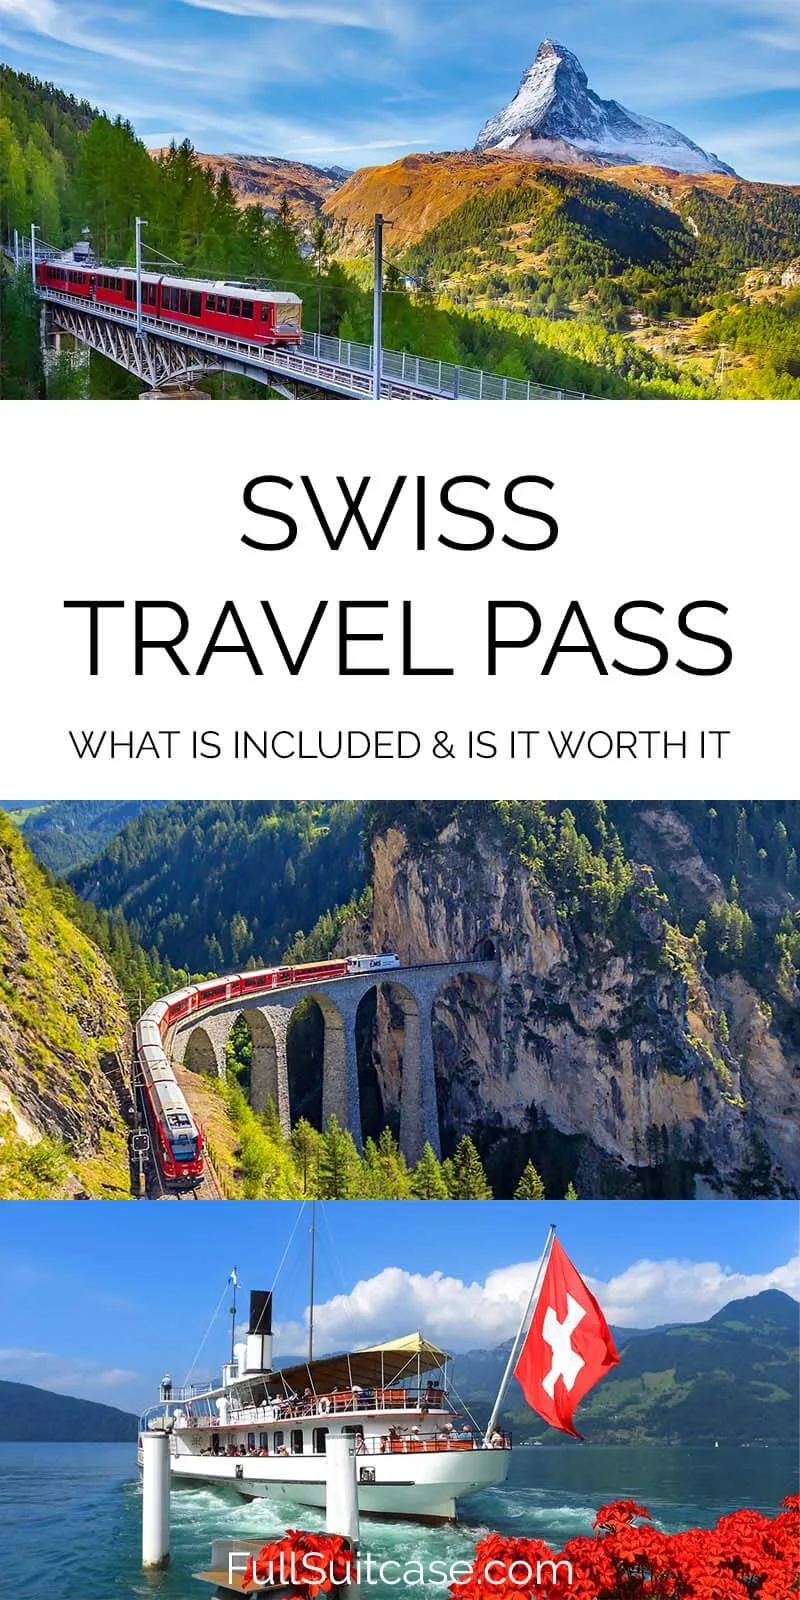 Swiss Travel Pass in Switzerland - what is included and is it worth buying it